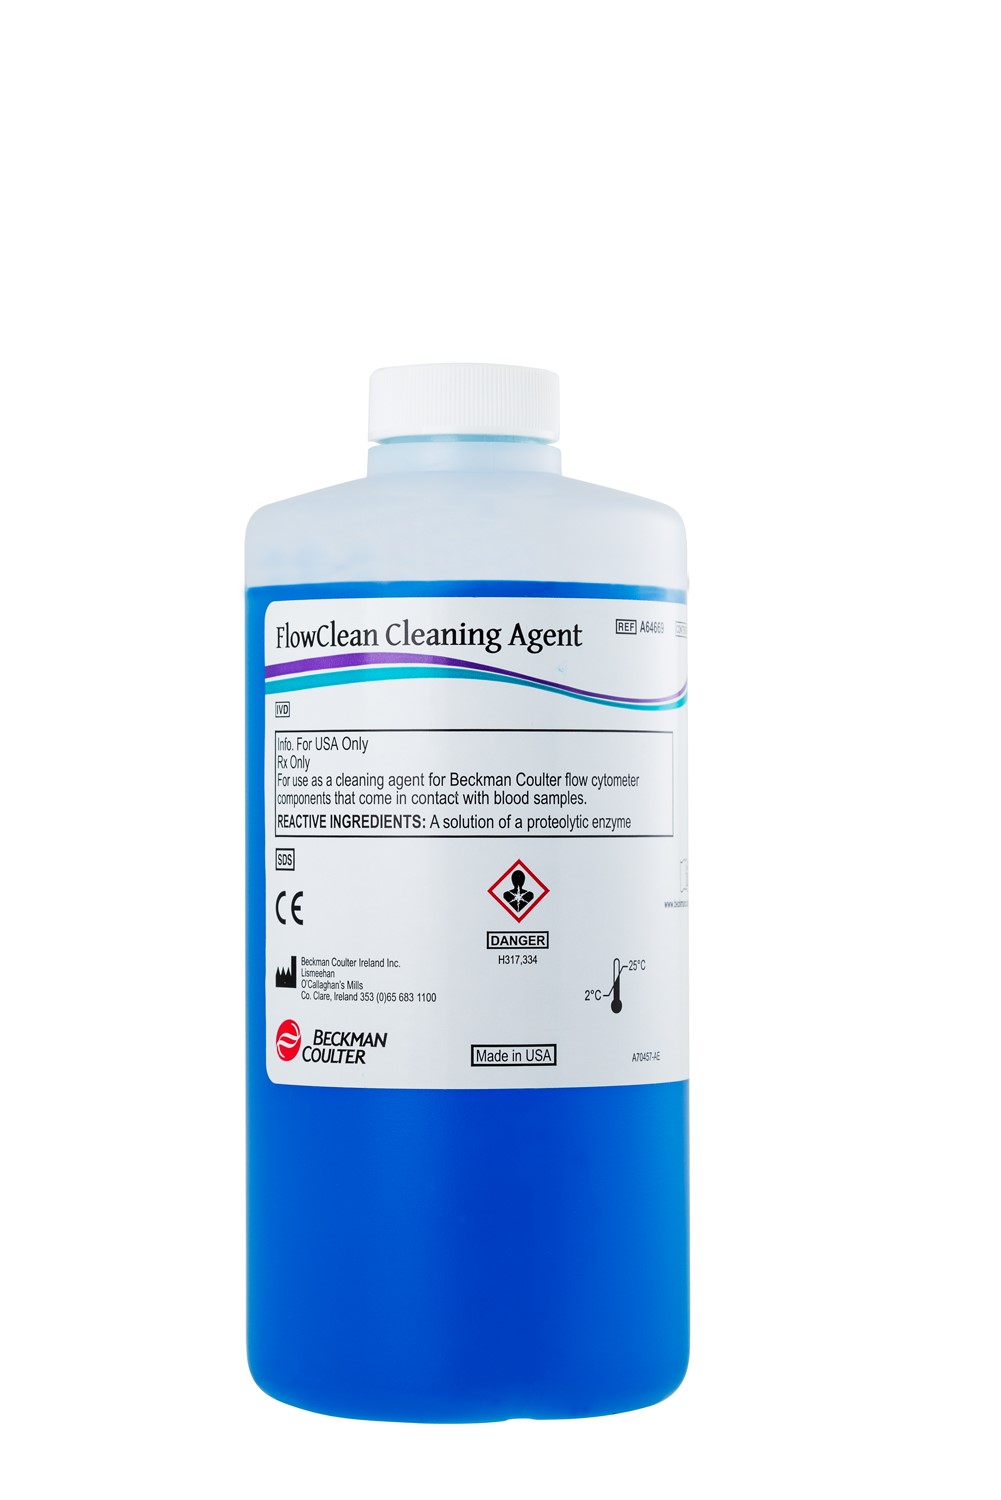 FlowClearn Cleaning Agent